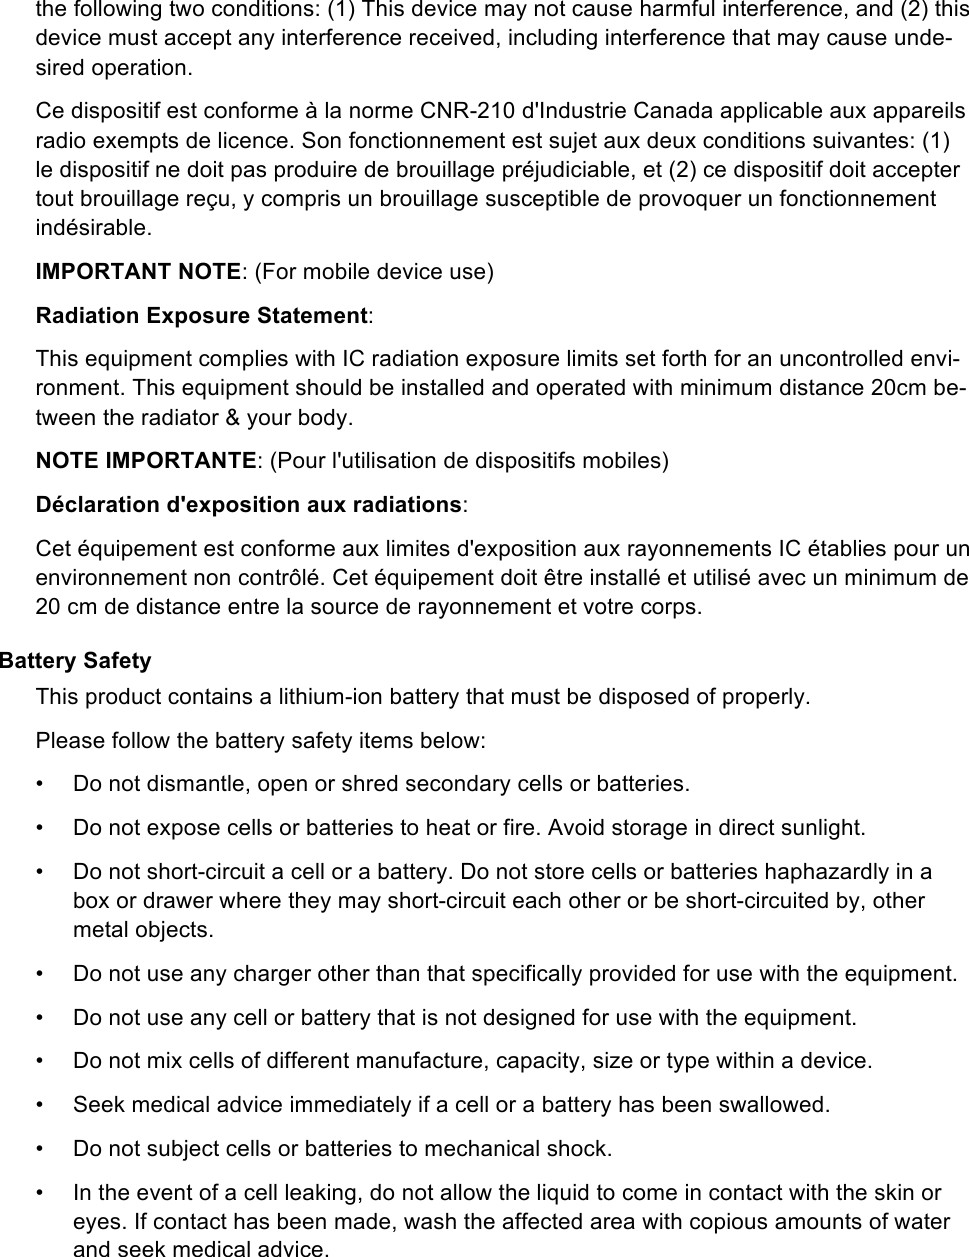 the following two conditions: (1) This device may not cause harmful interference, and (2) this device must accept any interference received, including interference that may cause unde-sired operation. Ce dispositif est conforme à la norme CNR-210 d&apos;Industrie Canada applicable aux appareils radio exempts de licence. Son fonctionnement est sujet aux deux conditions suivantes: (1) le dispositif ne doit pas produire de brouillage préjudiciable, et (2) ce dispositif doit accepter tout brouillage reçu, y compris un brouillage susceptible de provoquer un fonctionnement indésirable. IMPORTANT NOTE: (For mobile device use) Radiation Exposure Statement: This equipment complies with IC radiation exposure limits set forth for an uncontrolled envi-ronment. This equipment should be installed and operated with minimum distance 20cm be-tween the radiator &amp; your body. NOTE IMPORTANTE: (Pour l&apos;utilisation de dispositifs mobiles) Déclaration d&apos;exposition aux radiations: Cet équipement est conforme aux limites d&apos;exposition aux rayonnements IC établies pour un environnement non contrôlé. Cet équipement doit être installé et utilisé avec un minimum de 20 cm de distance entre la source de rayonnement et votre corps. Battery Safety This product contains a lithium-ion battery that must be disposed of properly.  Please follow the battery safety items below: •  Do not dismantle, open or shred secondary cells or batteries. •  Do not expose cells or batteries to heat or fire. Avoid storage in direct sunlight. •  Do not short-circuit a cell or a battery. Do not store cells or batteries haphazardly in a box or drawer where they may short-circuit each other or be short-circuited by, other metal objects. •  Do not use any charger other than that specifically provided for use with the equipment. •  Do not use any cell or battery that is not designed for use with the equipment. •  Do not mix cells of different manufacture, capacity, size or type within a device. •  Seek medical advice immediately if a cell or a battery has been swallowed. •  Do not subject cells or batteries to mechanical shock. •  In the event of a cell leaking, do not allow the liquid to come in contact with the skin or eyes. If contact has been made, wash the affected area with copious amounts of water and seek medical advice. 